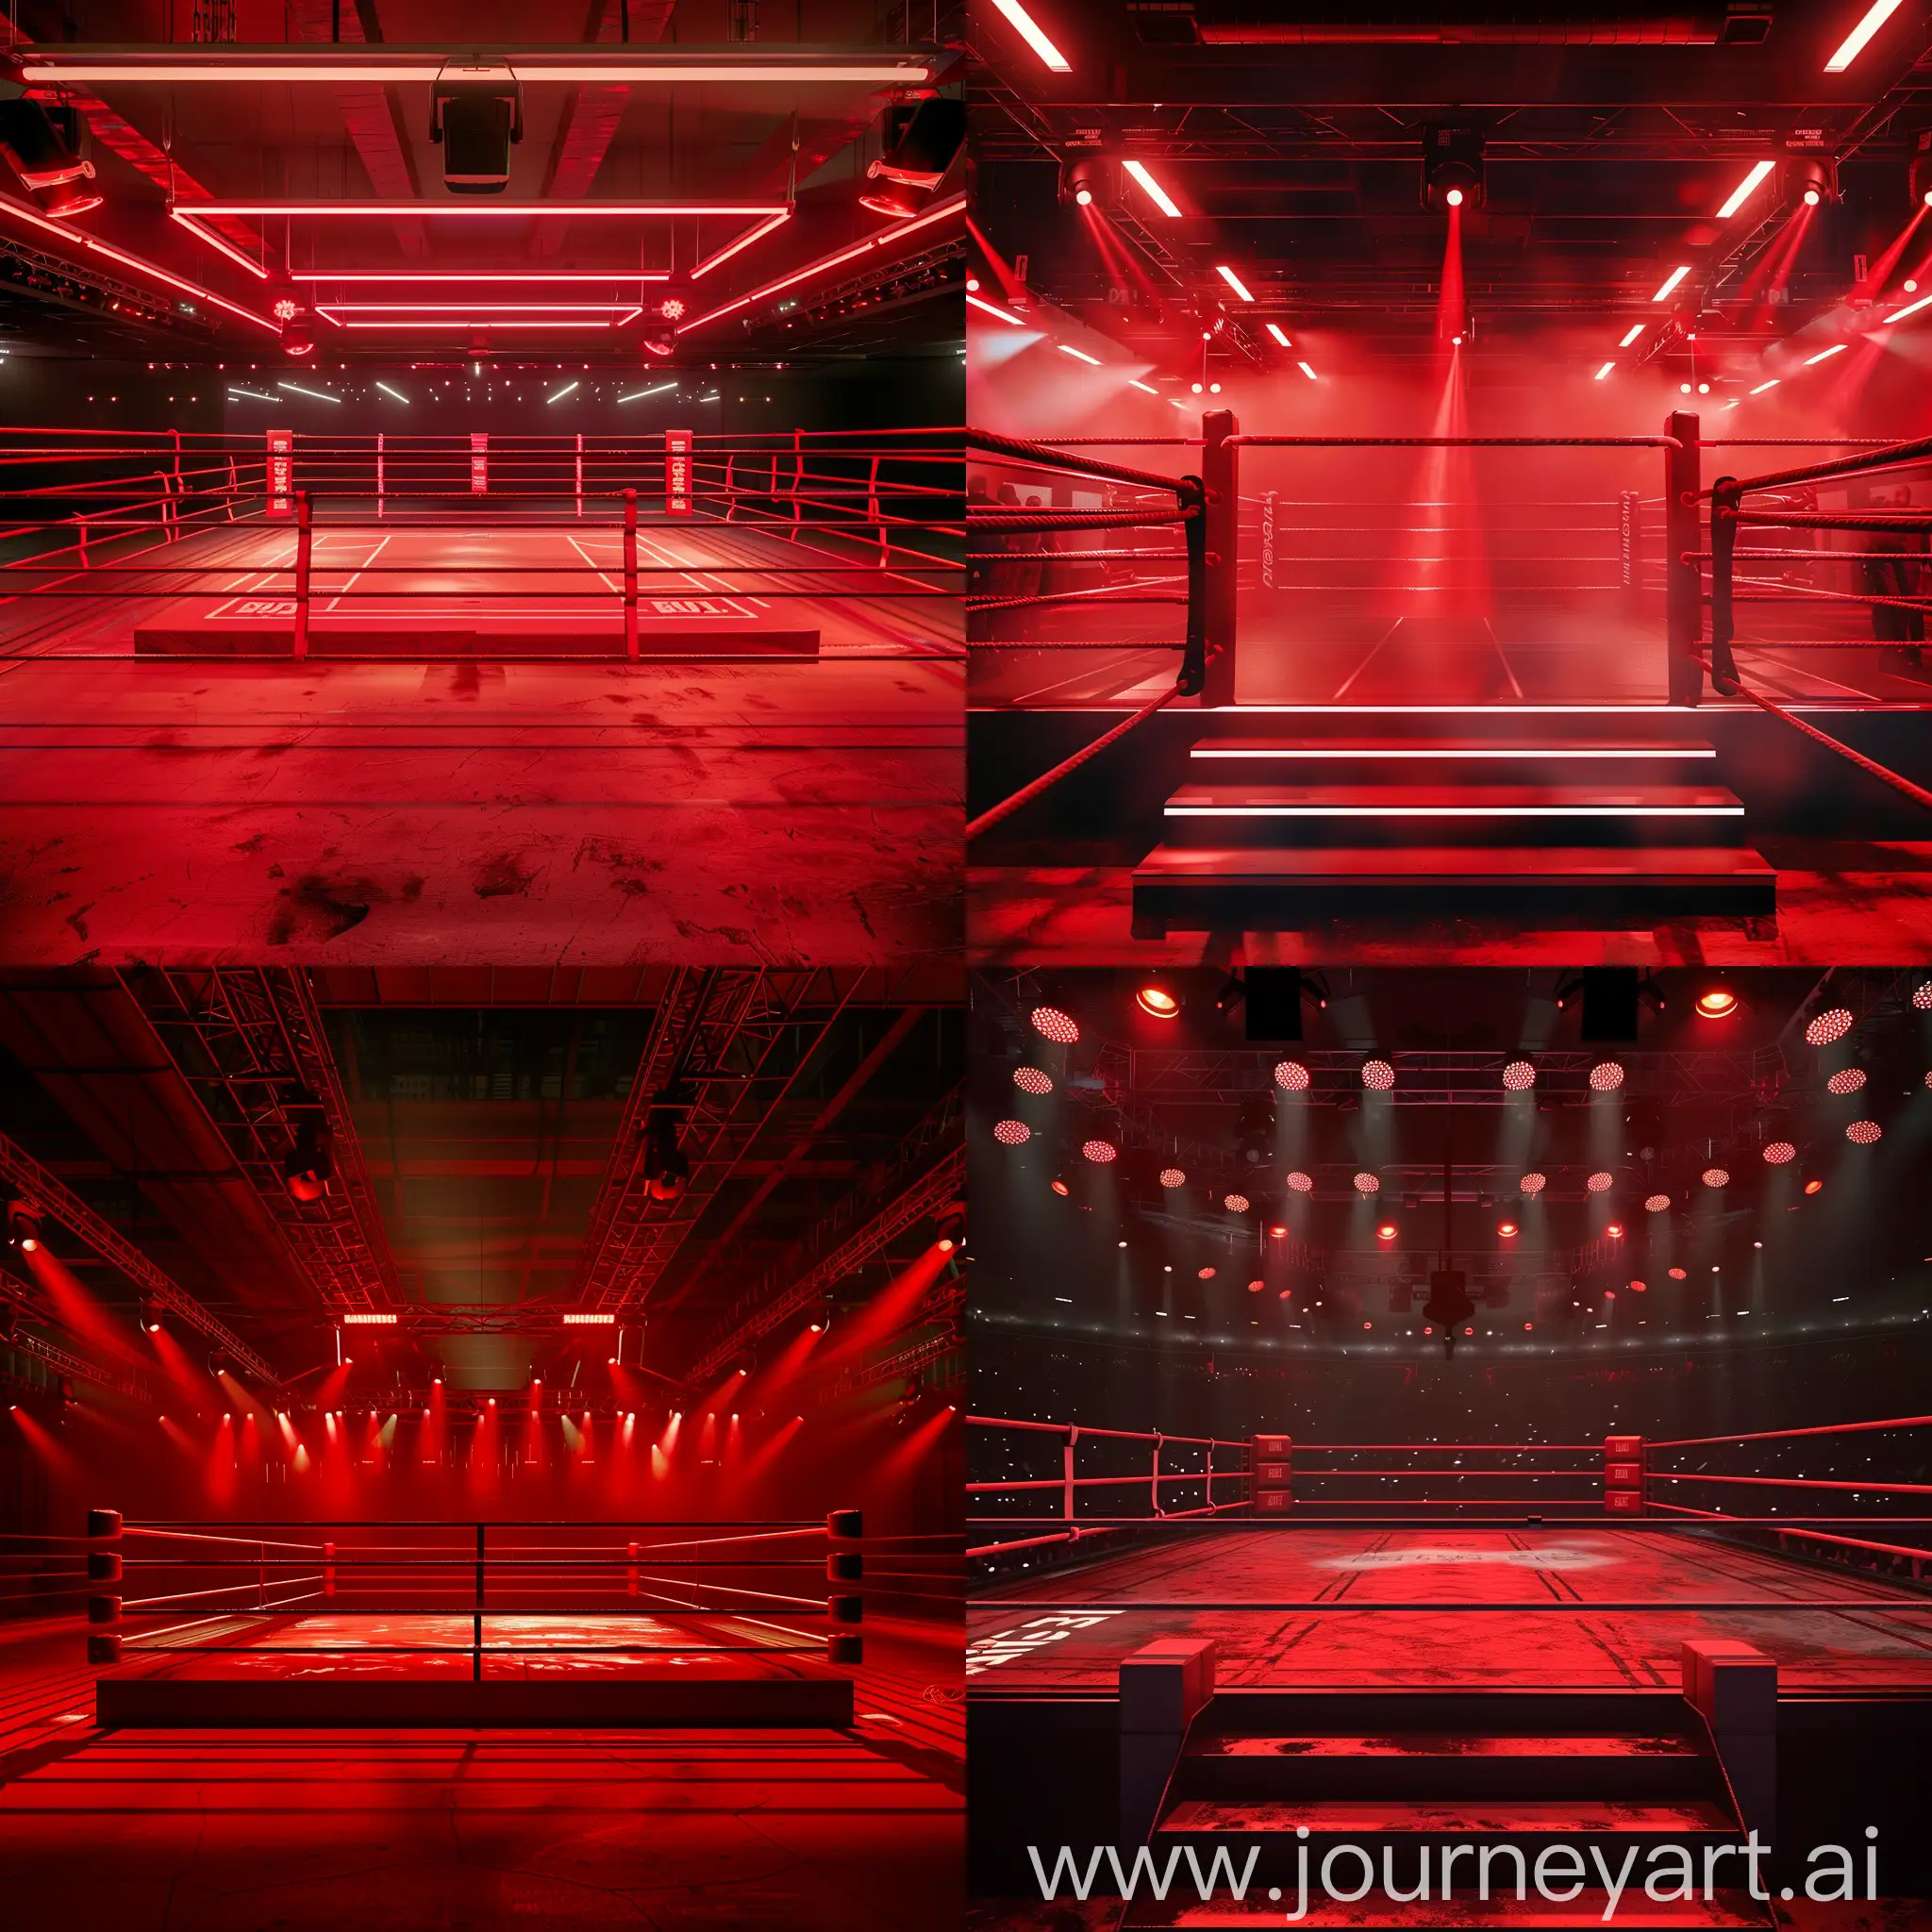 Intense-Boxing-Arena-in-Vibrant-Red-Colors